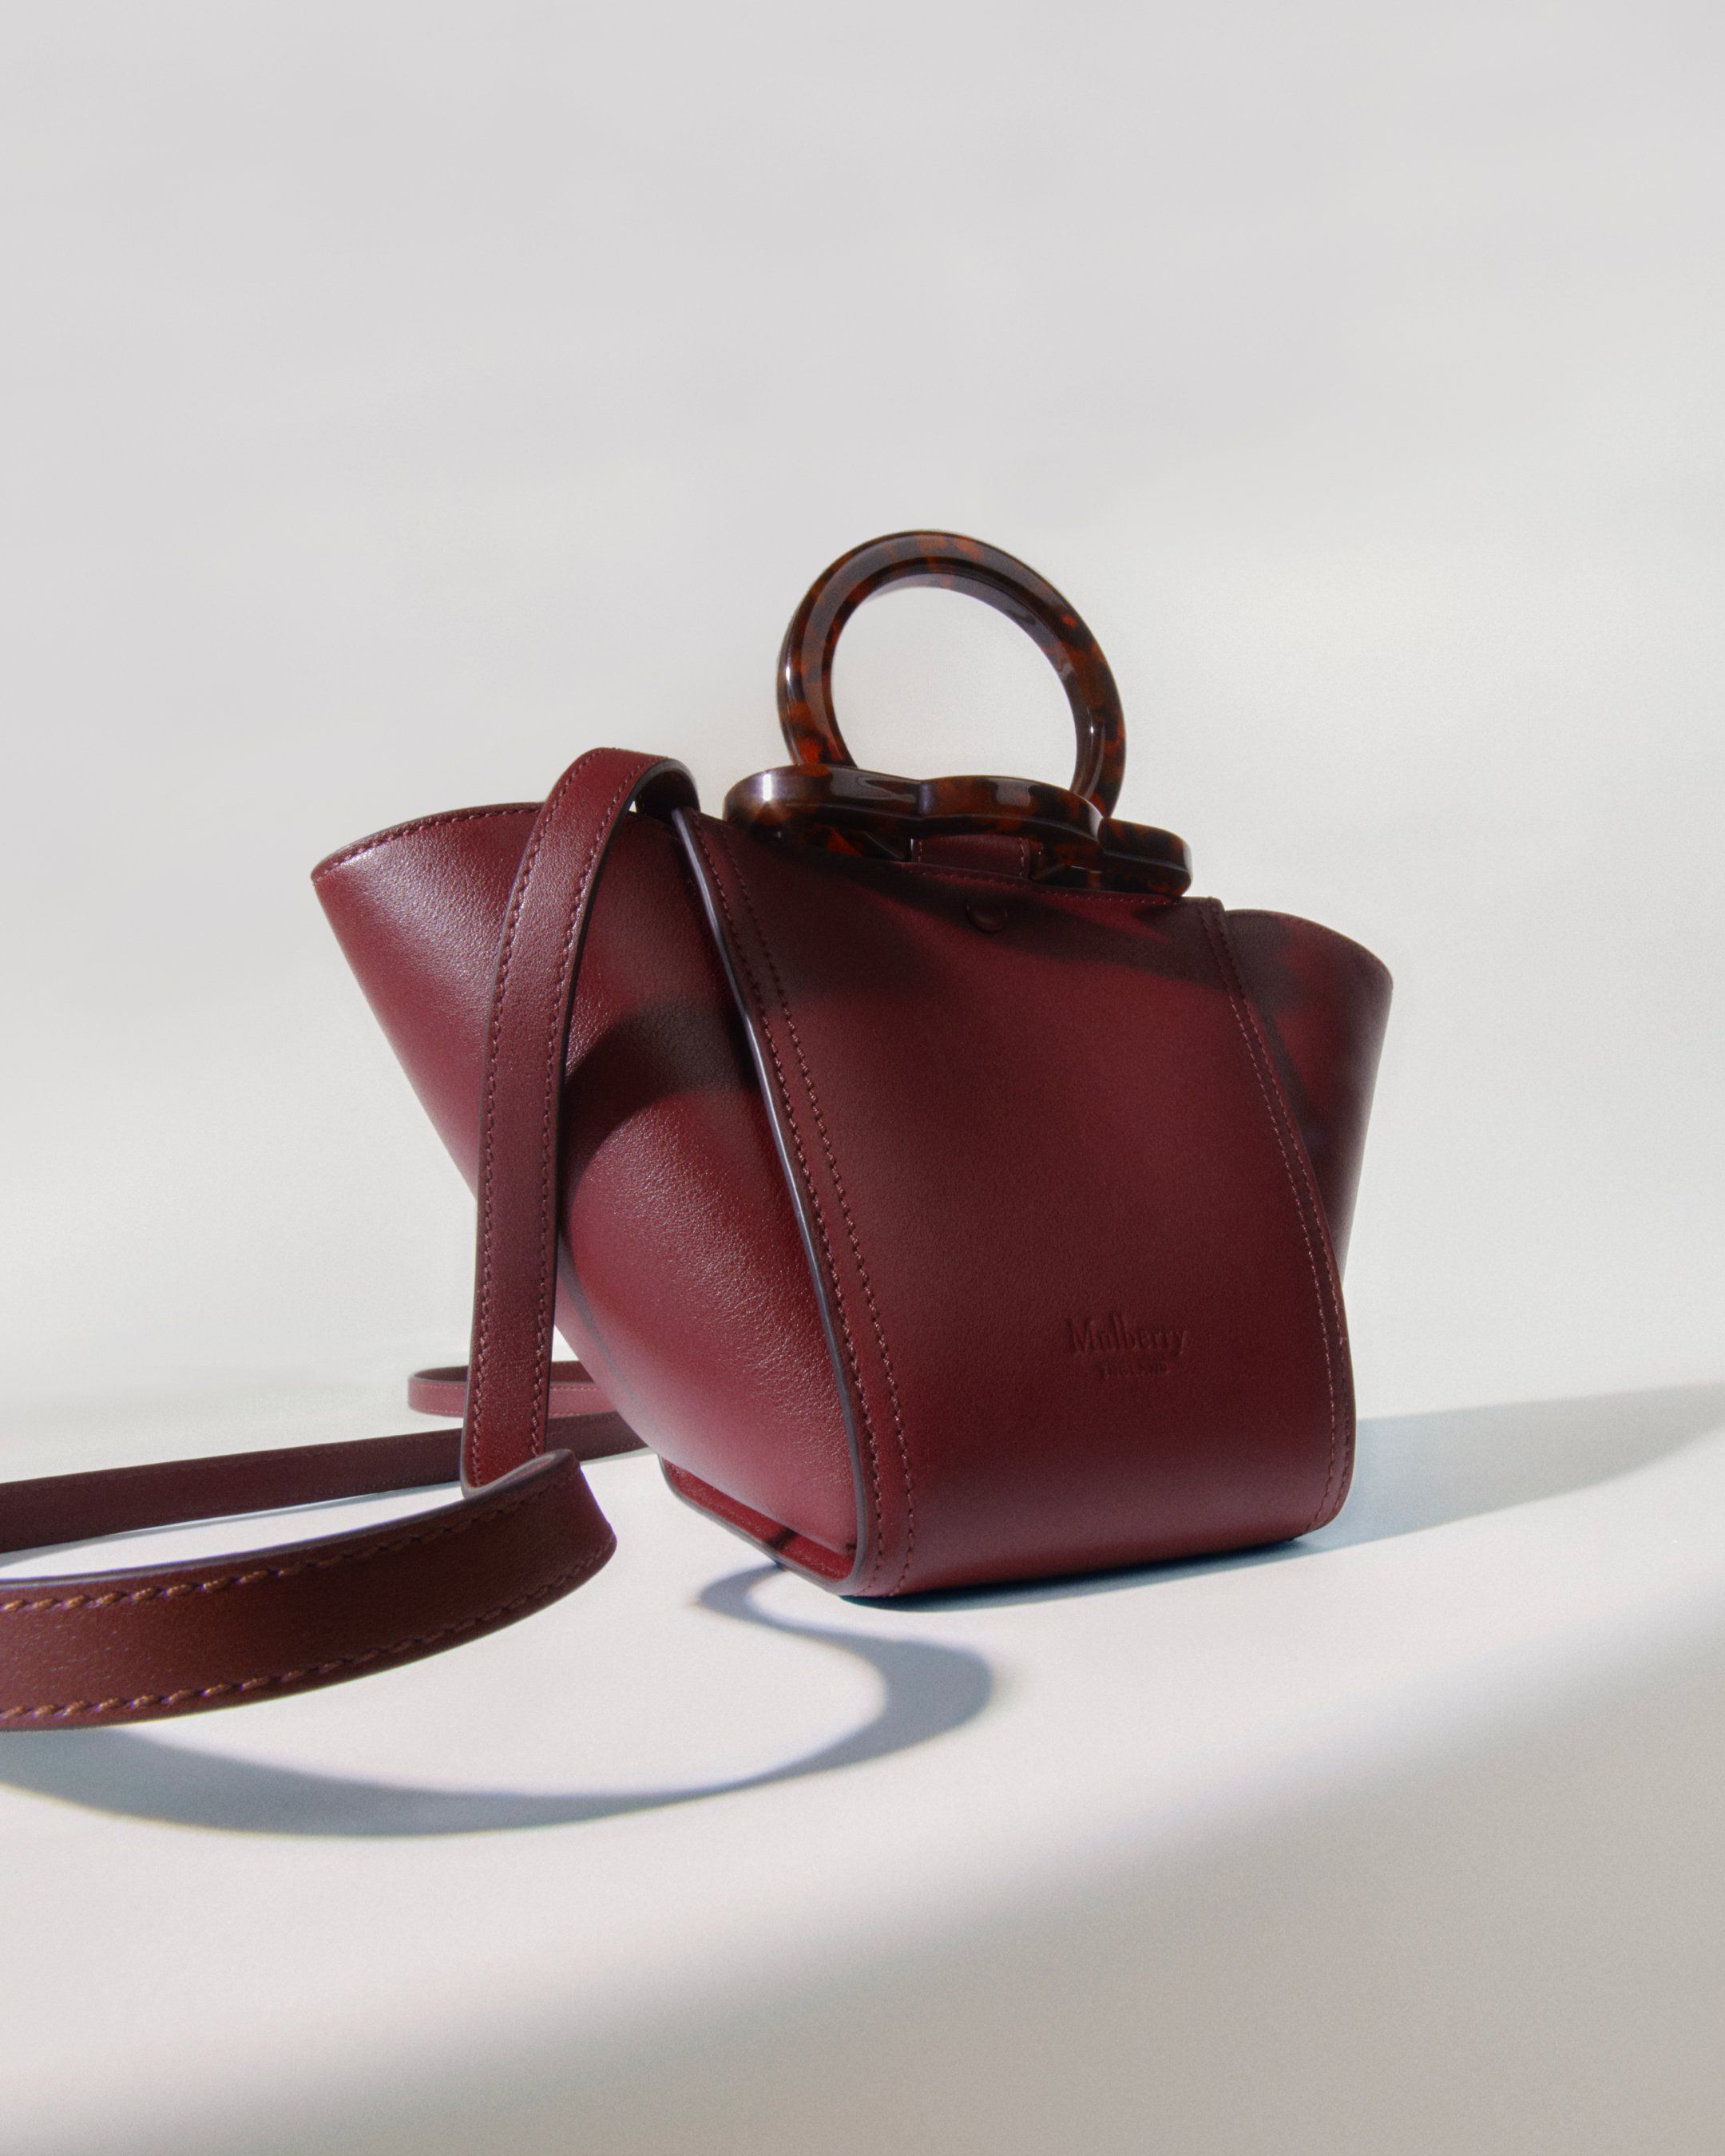 Mulberry Mini Rider's Top Handle Bag in Black Cherry